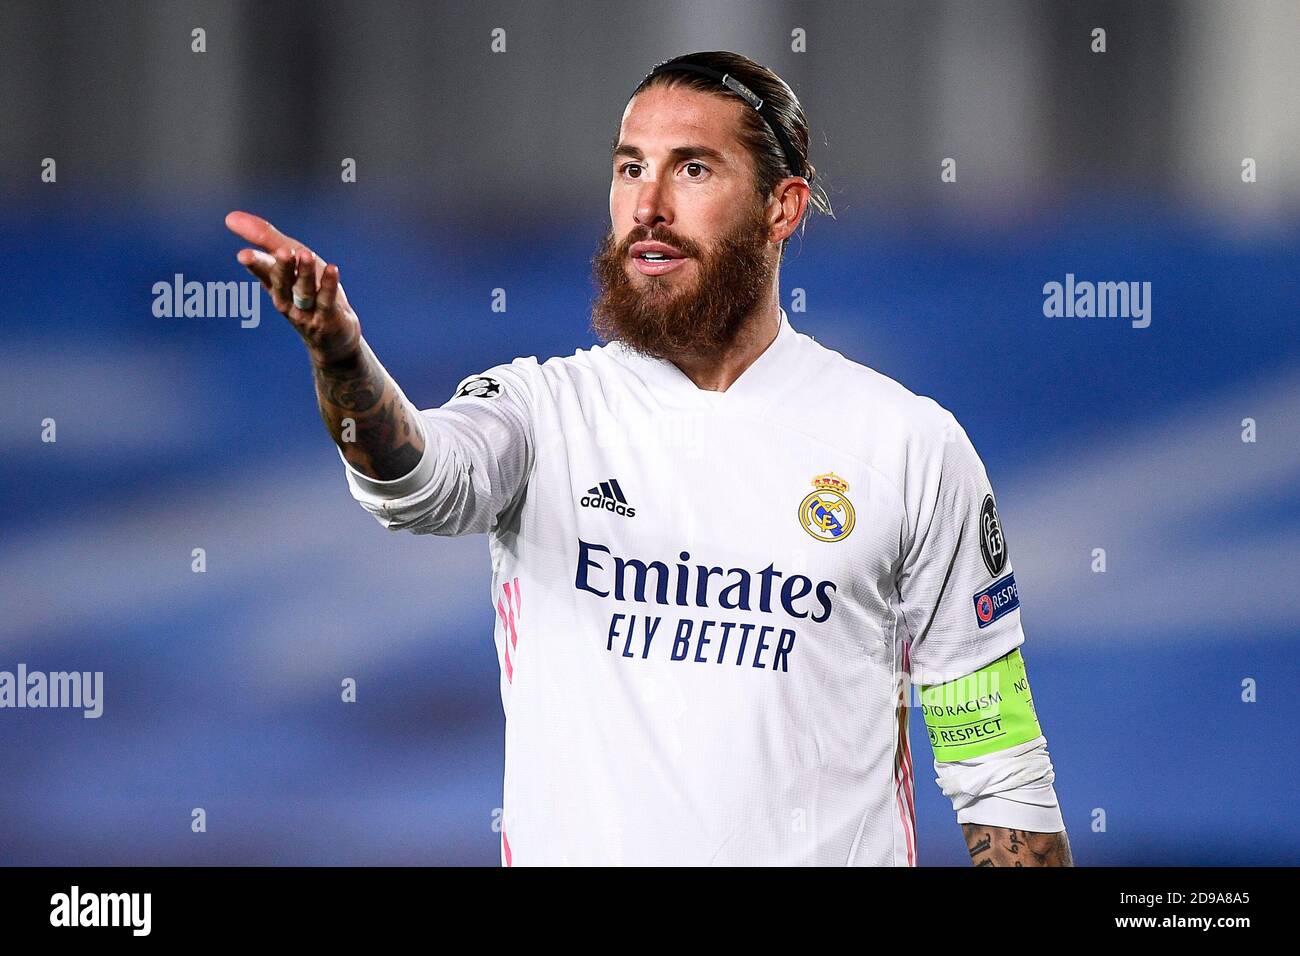 Madrid, Spain - 03 November, 2020: Sergio Ramos of Real Madrid CF gestures during the Champions League Group B football match between Real Madrid CF and FC Internazionale. Real Madrid CF won 3-2 over FC Internazionale. Credit: Nicolò Campo/Alamy Live News Stock Photo